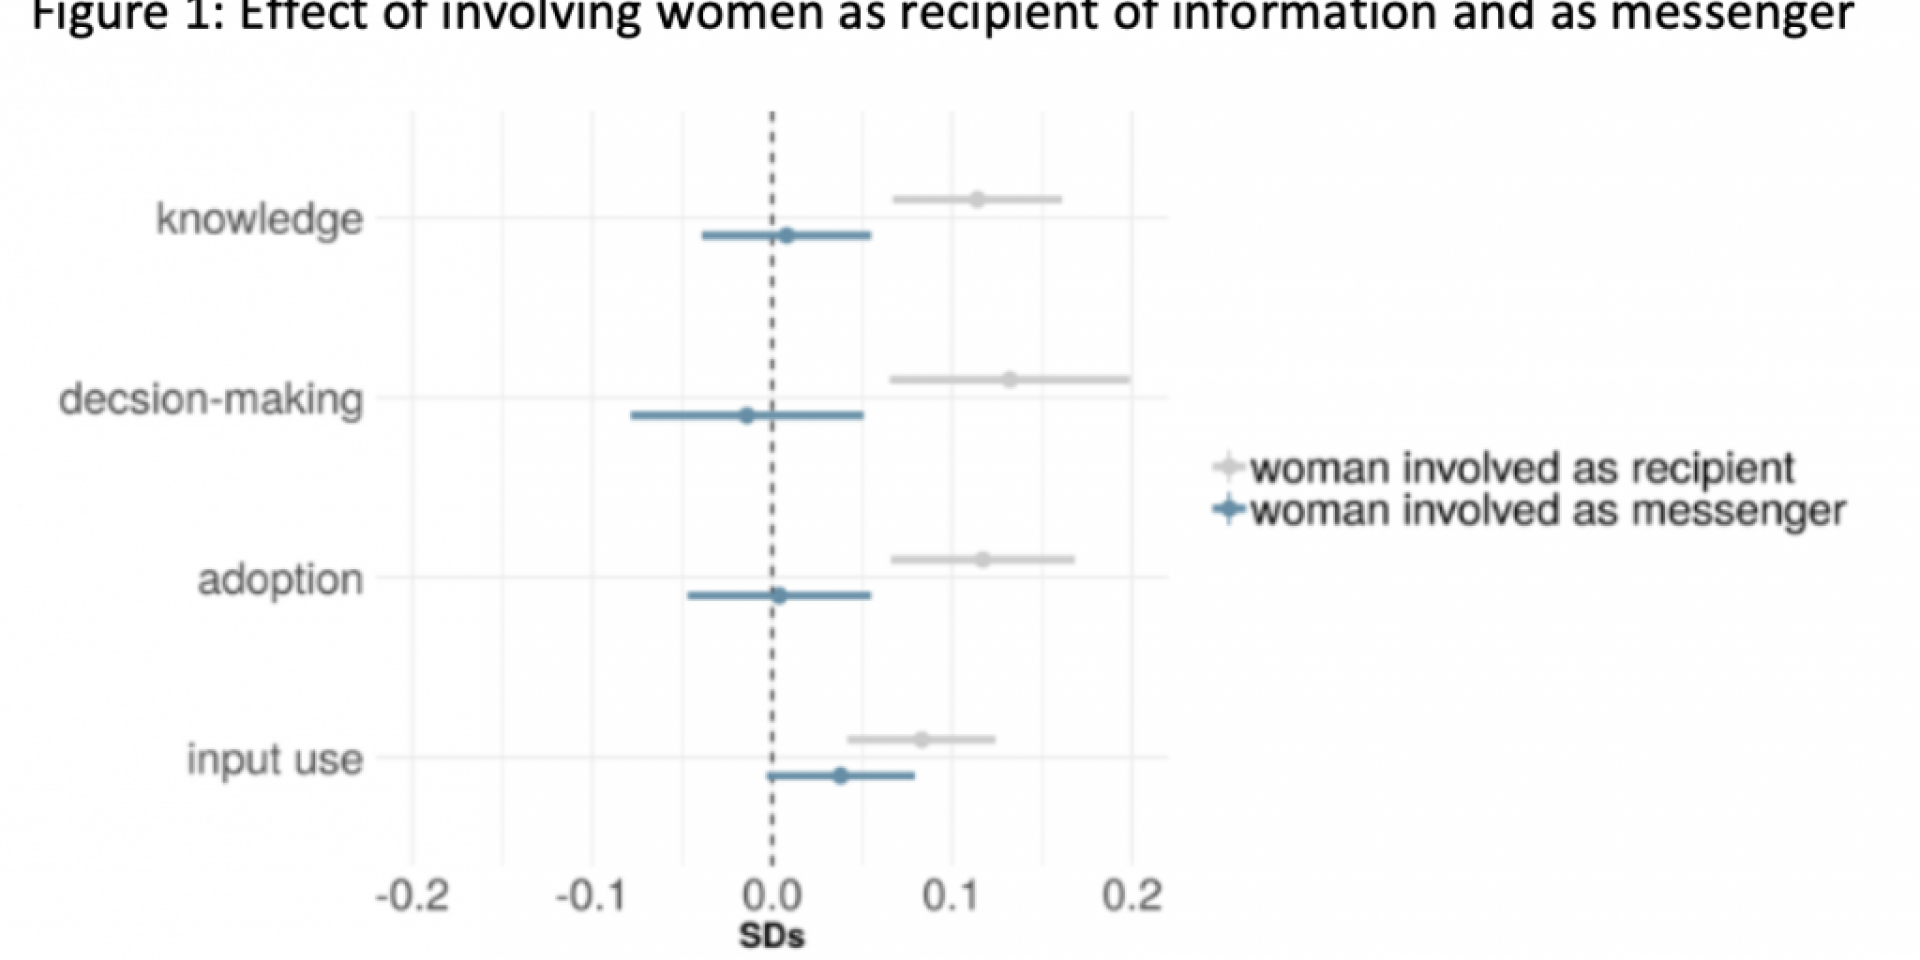 Effect of providing information to women